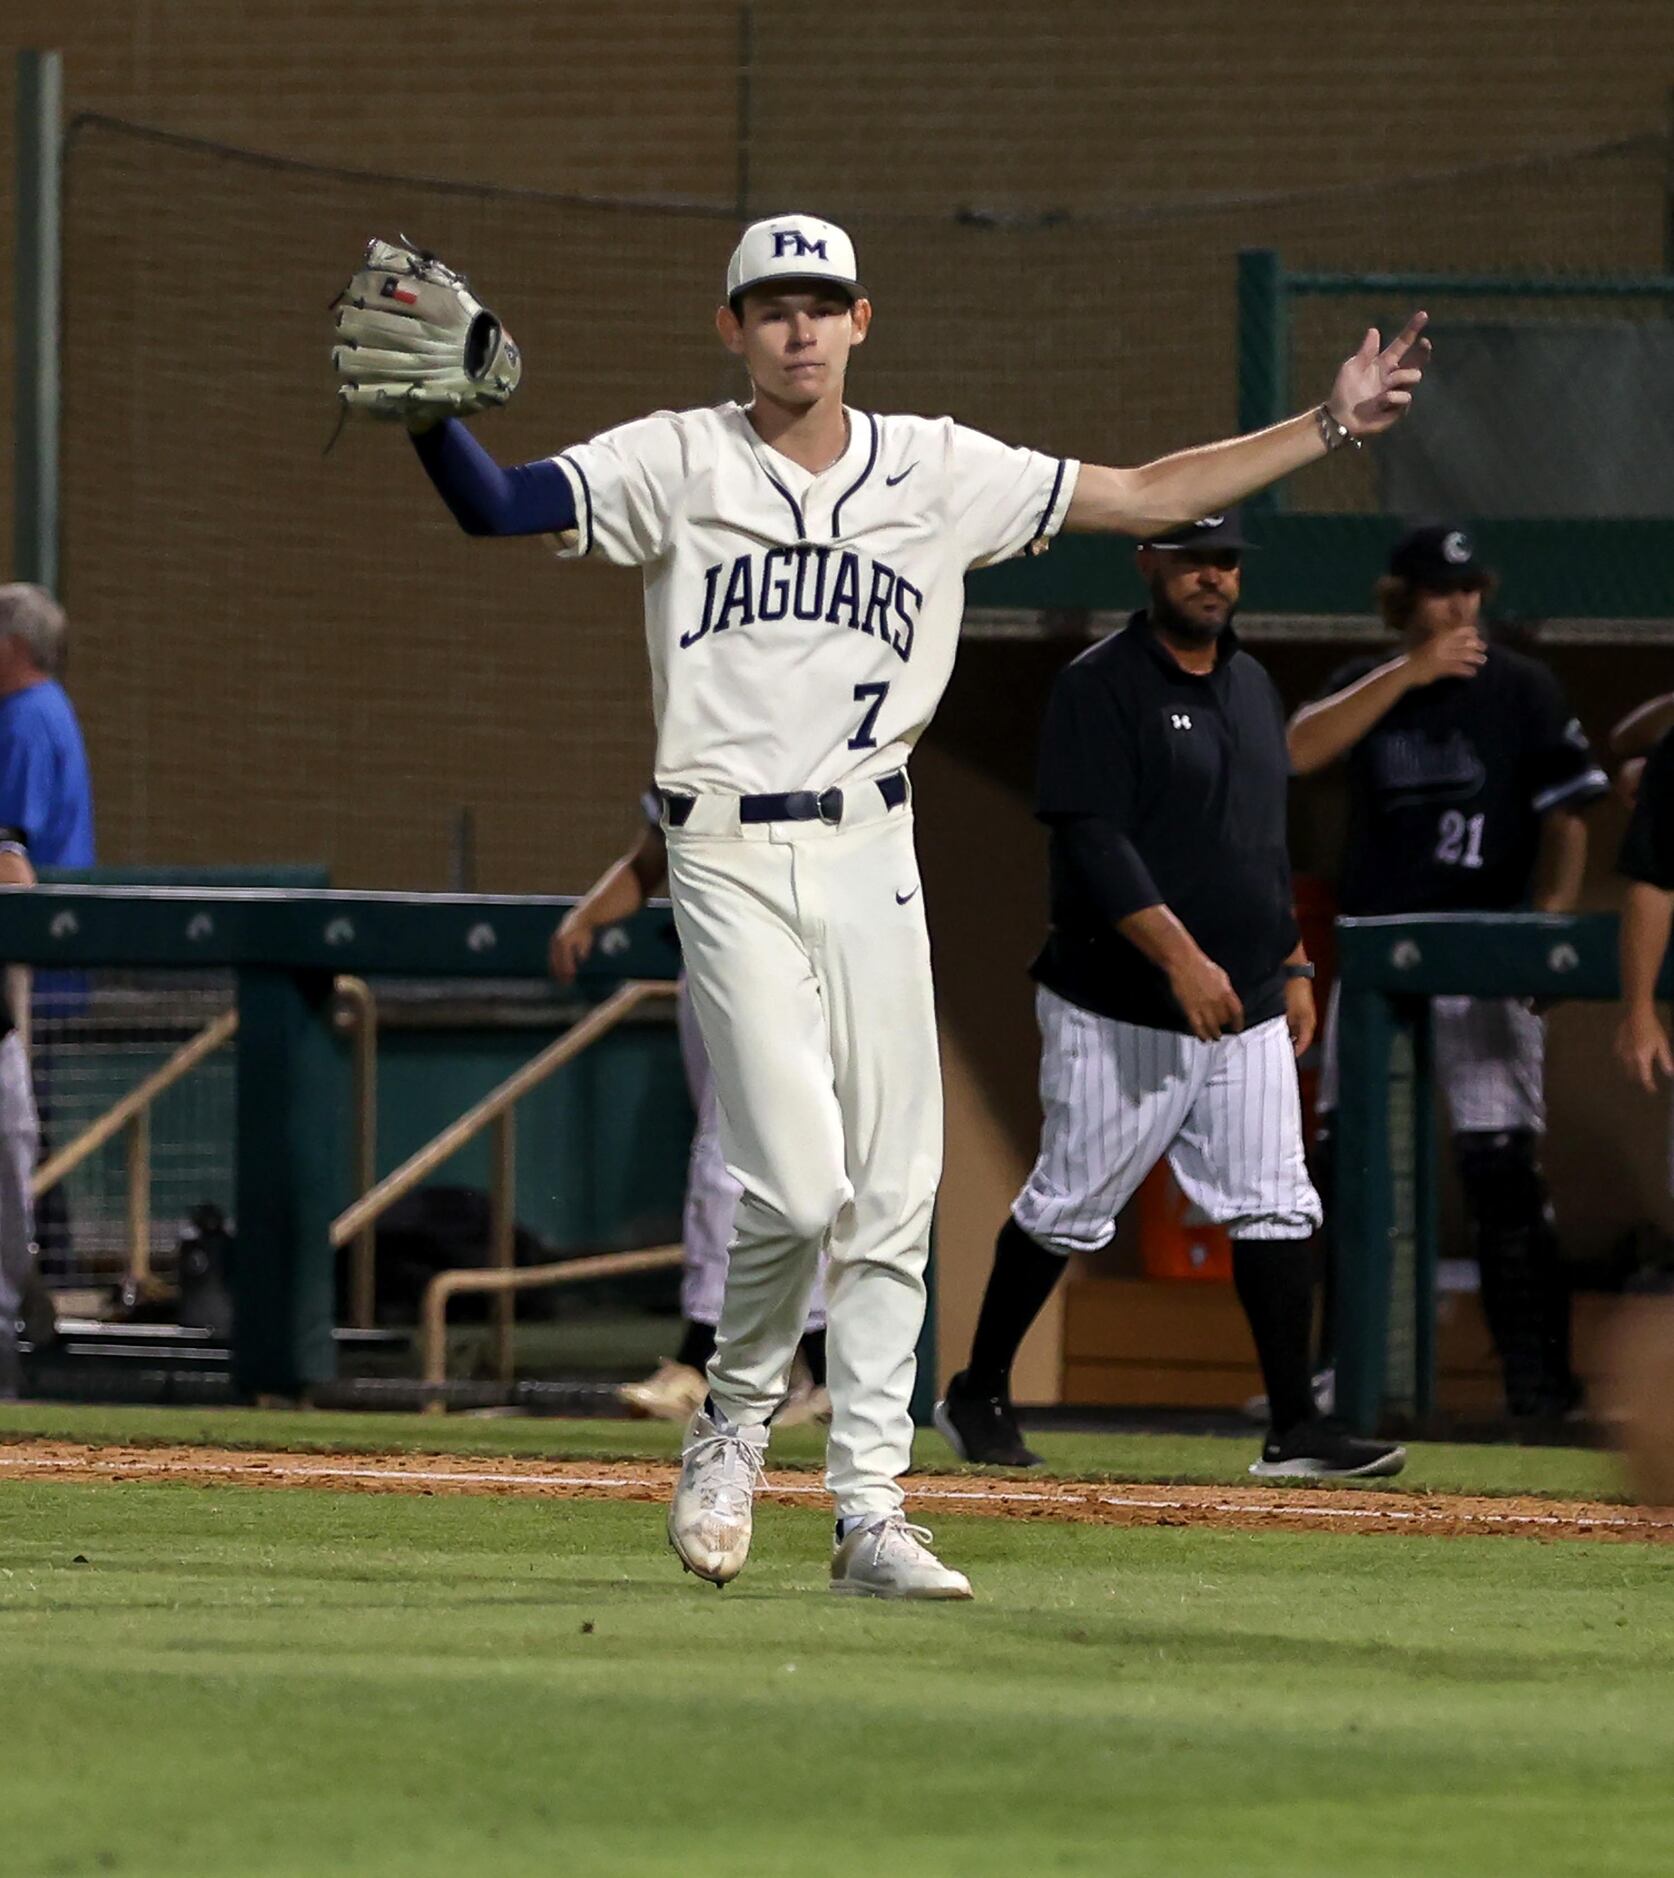 Flower Mound starting pitcher gets a complete win over Denton Guyer, 4-1 in Game 1 of a...